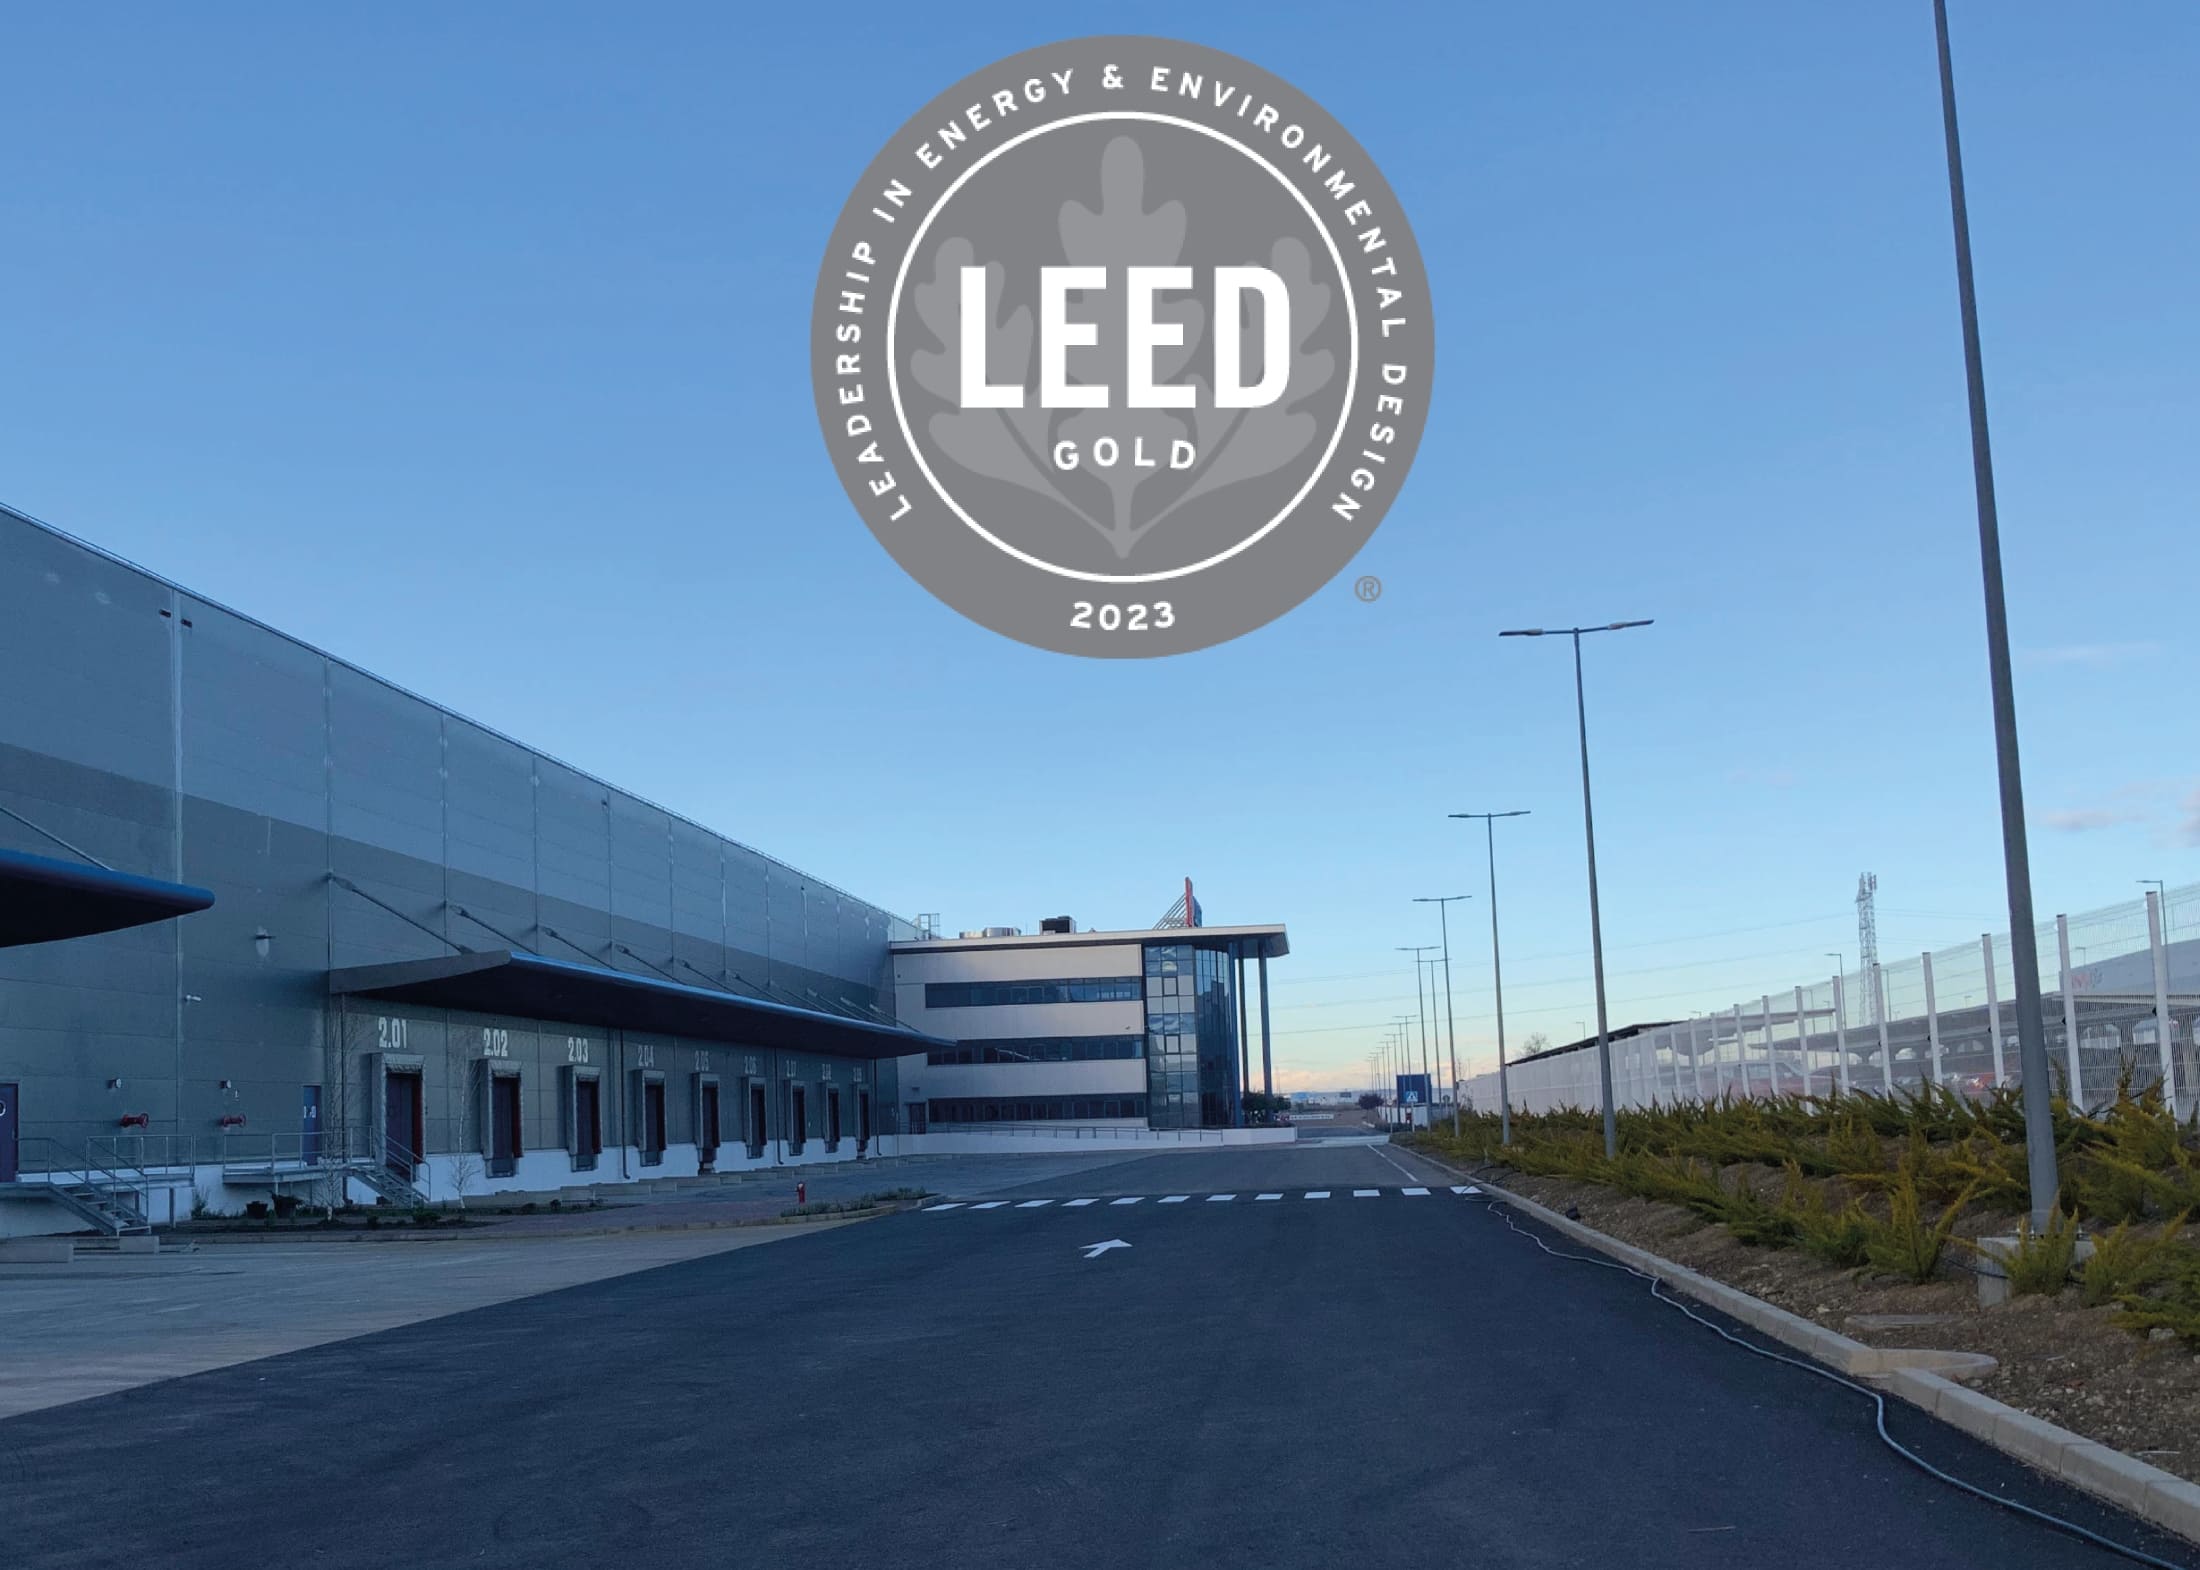 LEED Gold® Certification of Wiskitki and Illescas platforms